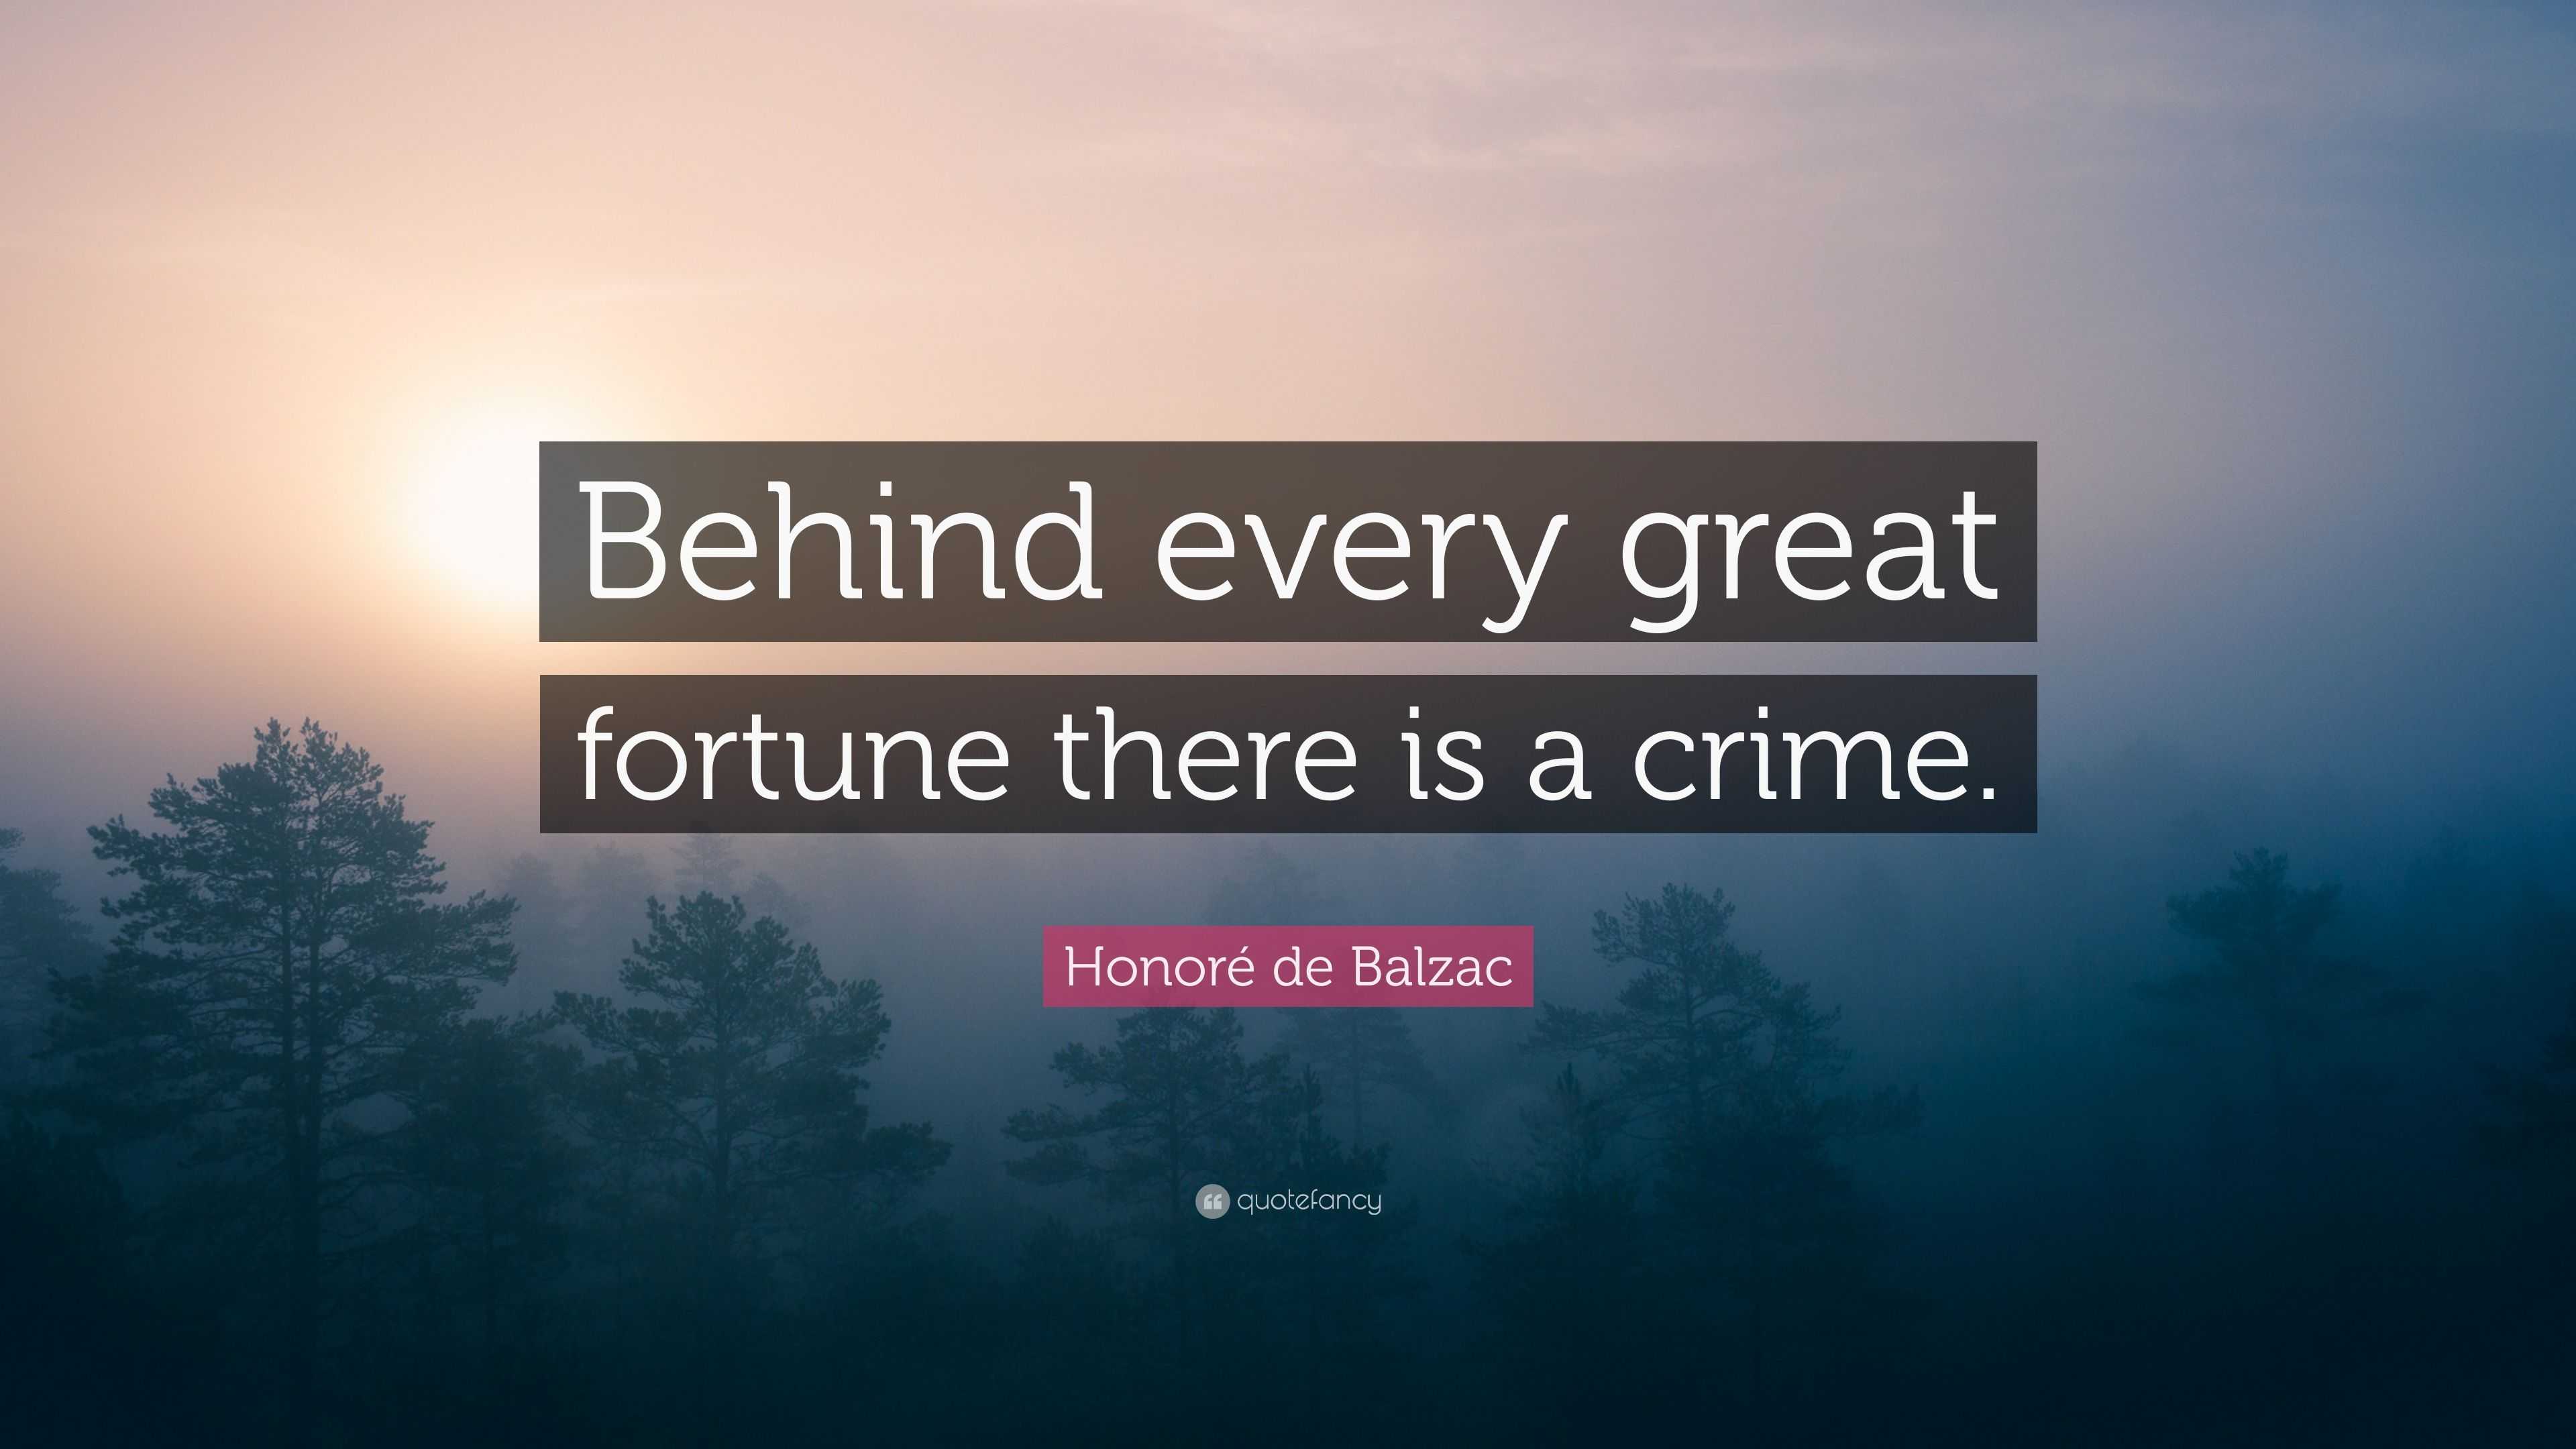 Honoré de Balzac Quote: “Behind every great fortune there is a crime.” (9 ...